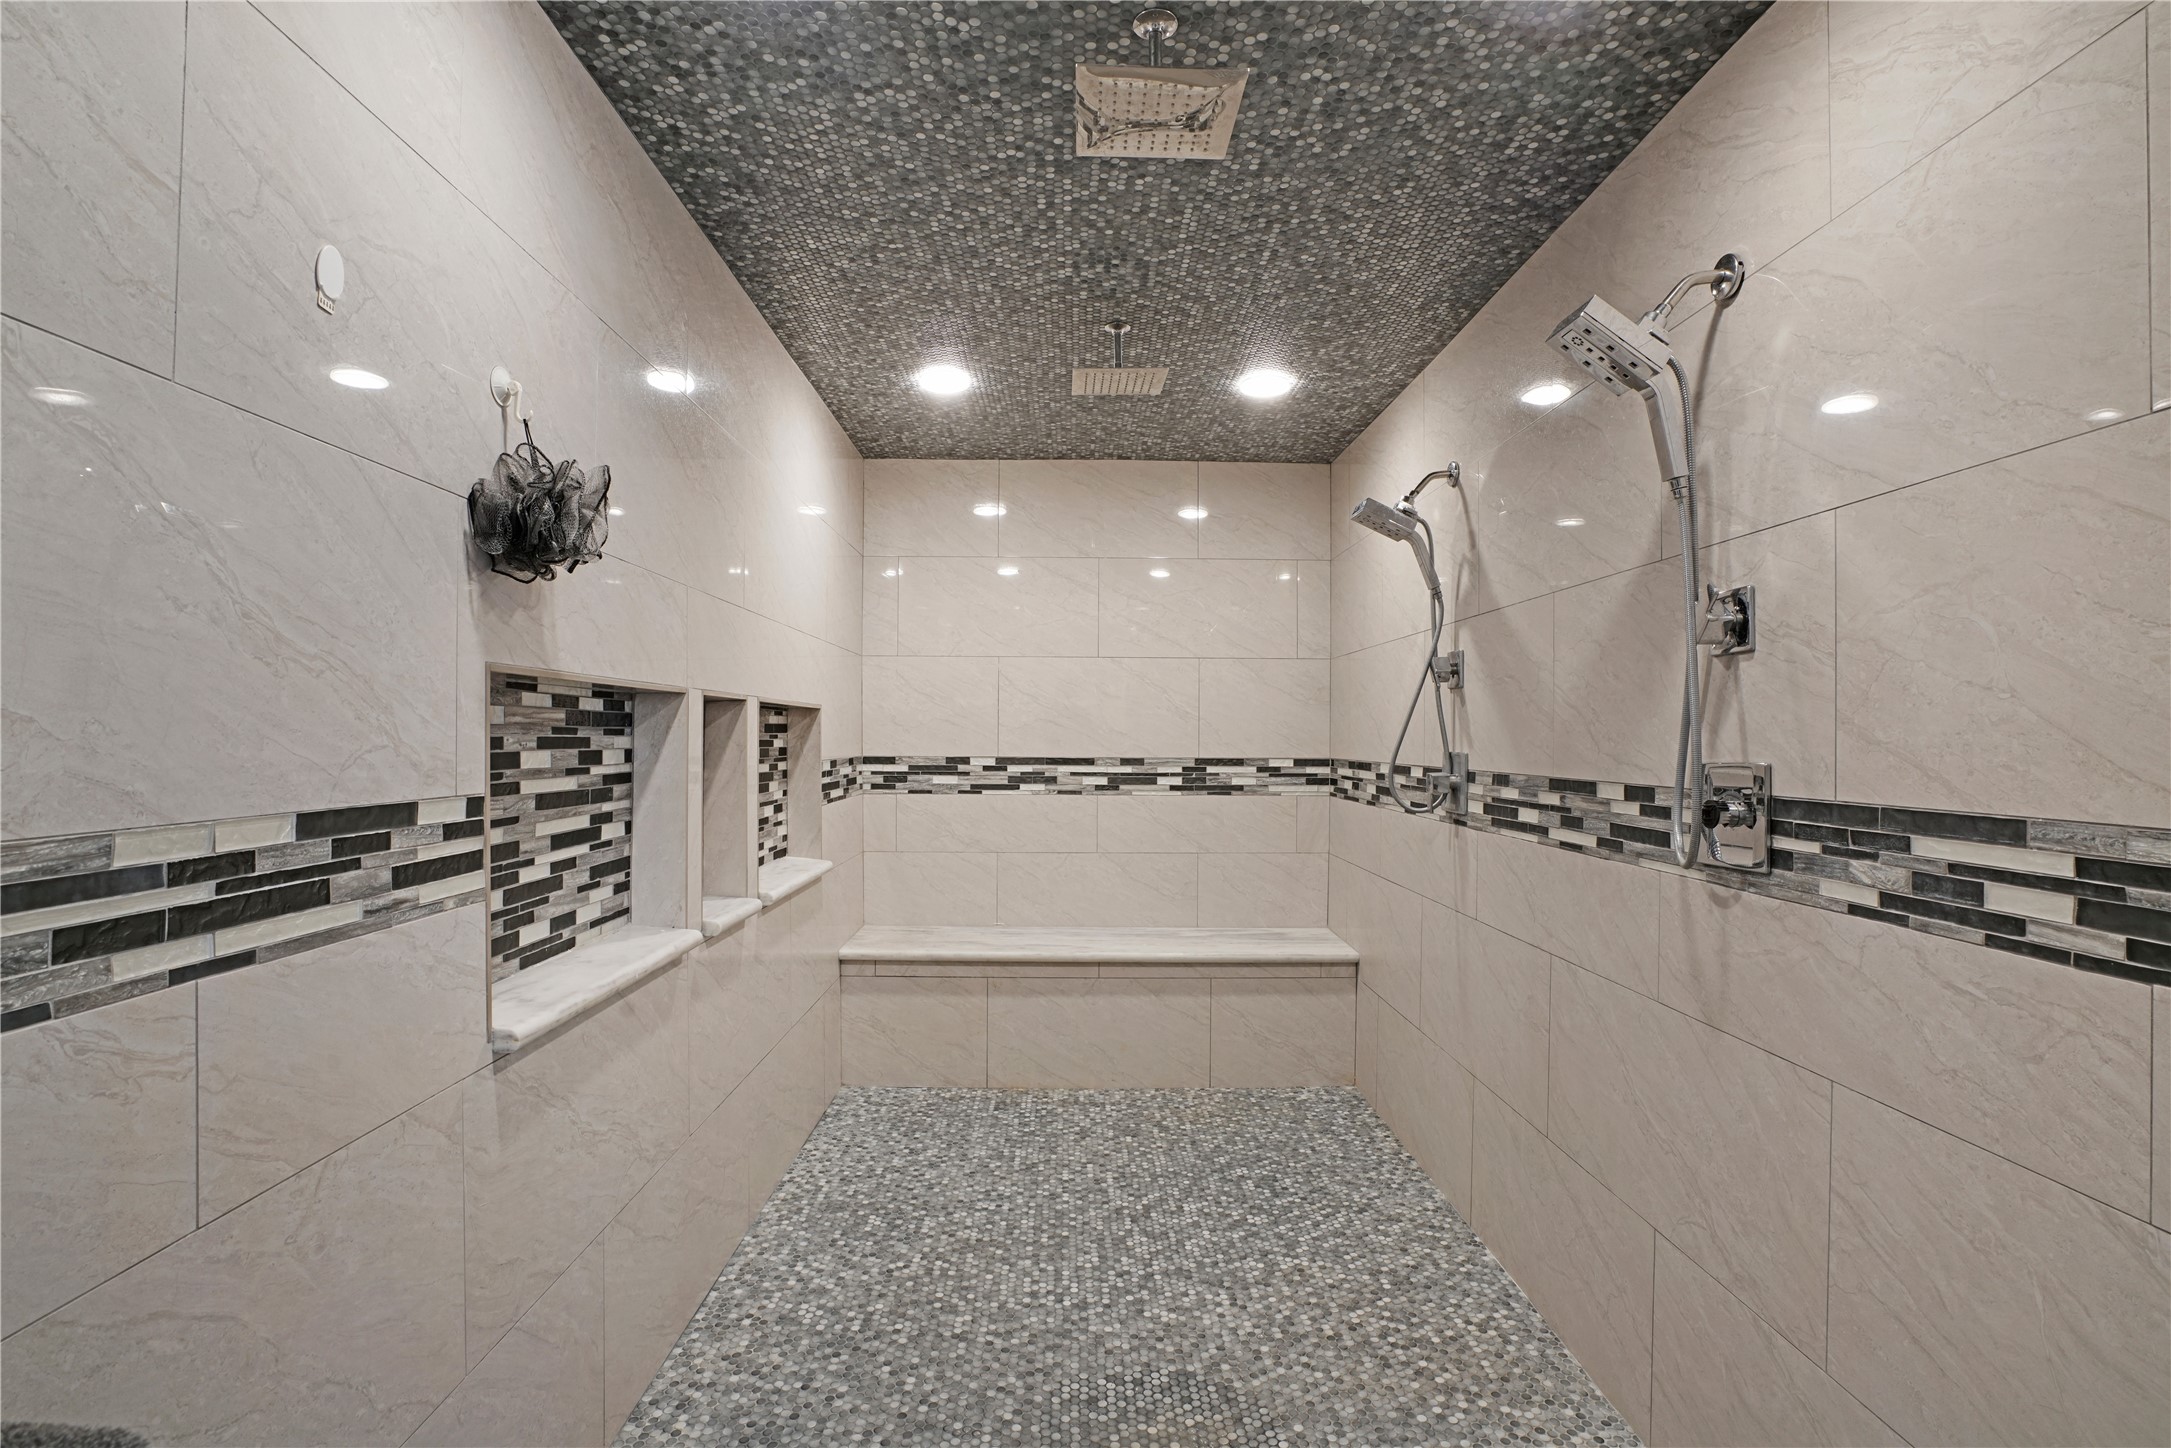 Talk about luxury - oversize shower with multiple rain shower heads.